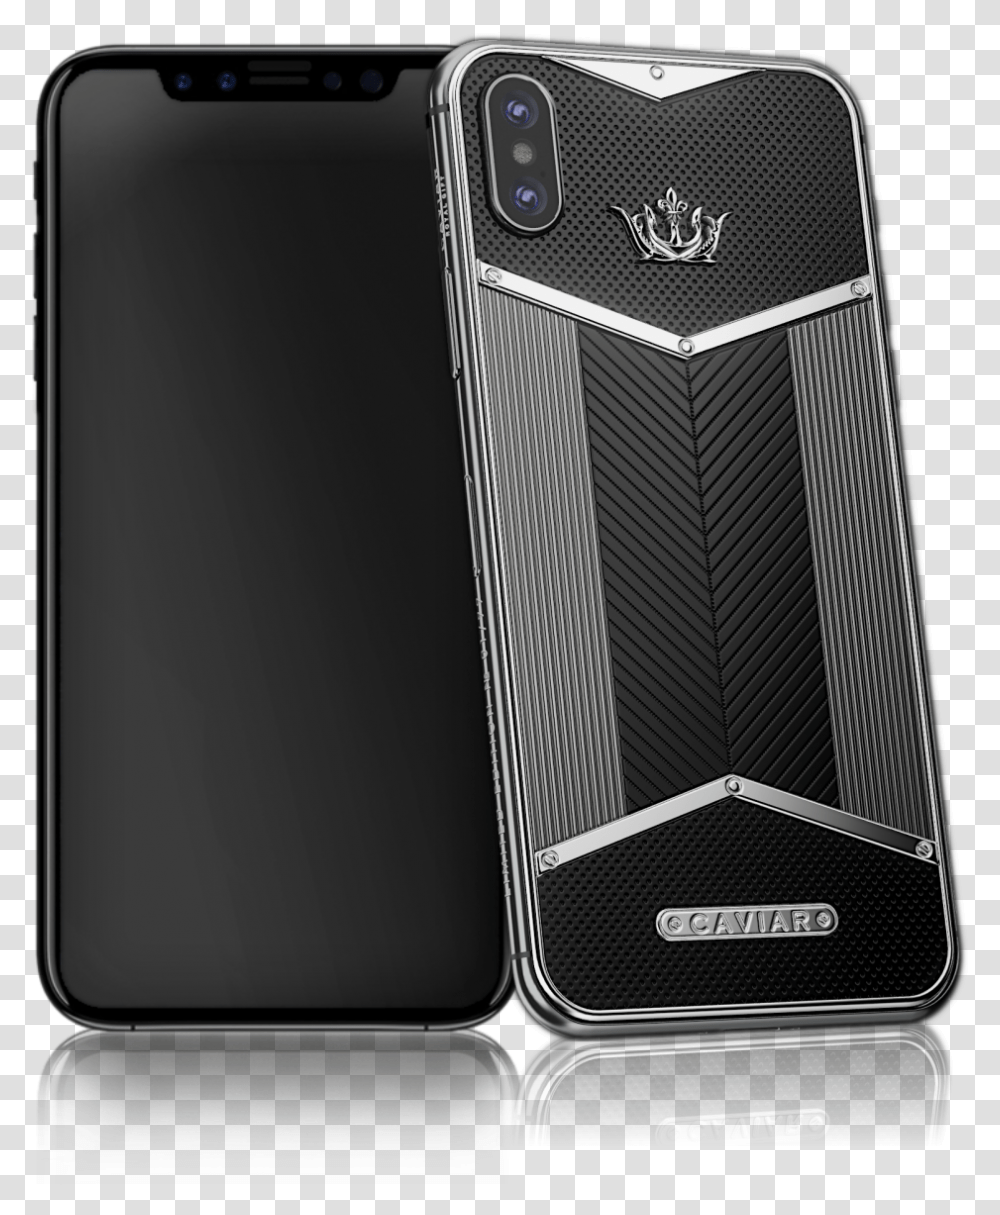 Caviar Iphone X Edition Black White Iphone X Caviar Case, Mobile Phone, Electronics, Cell Phone Transparent Png